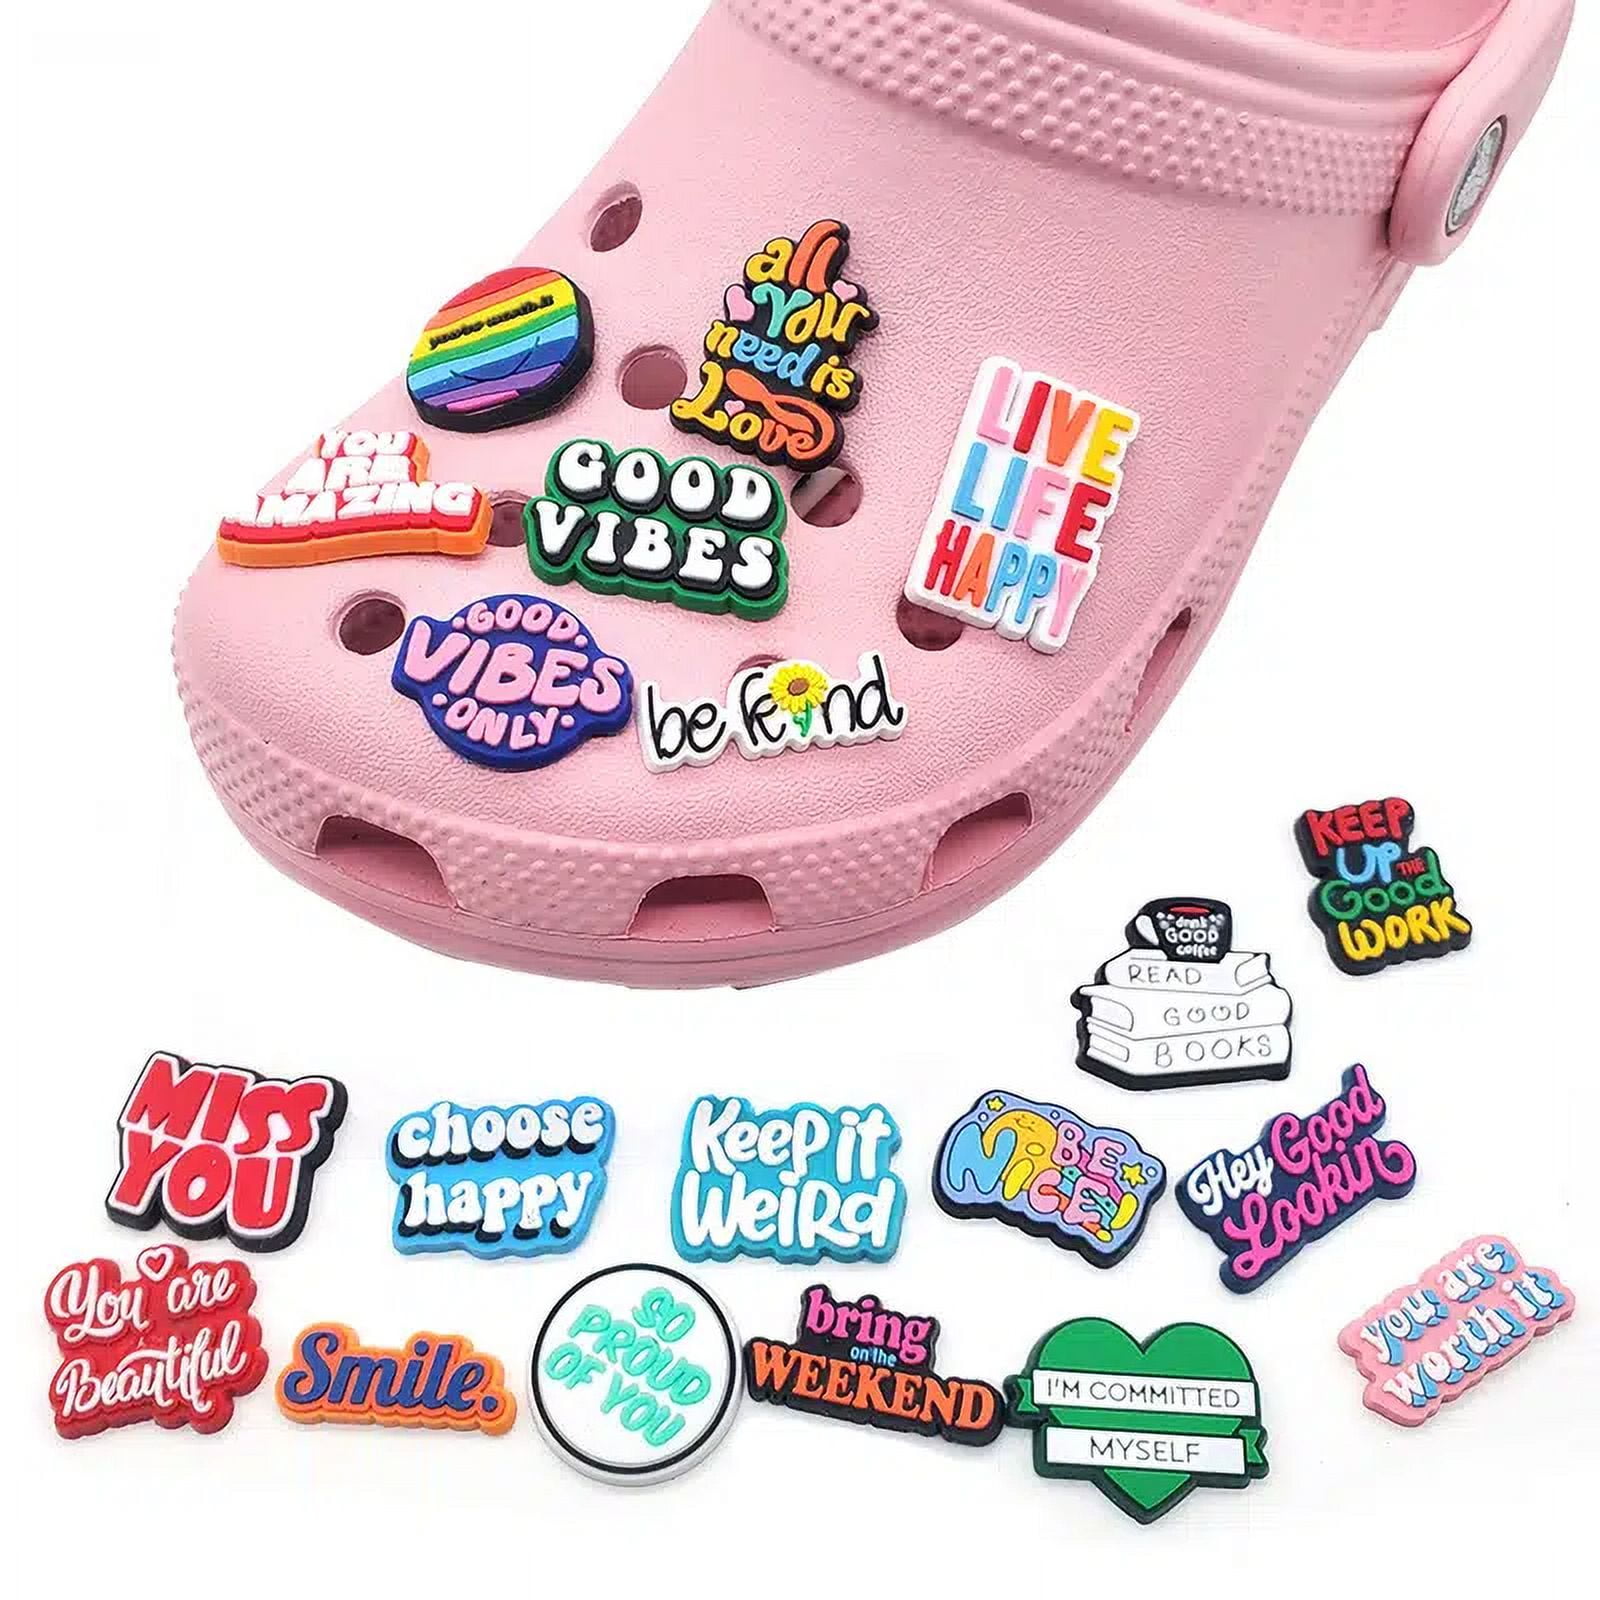 Letters Number Jibbitz, Croc Charms Girls